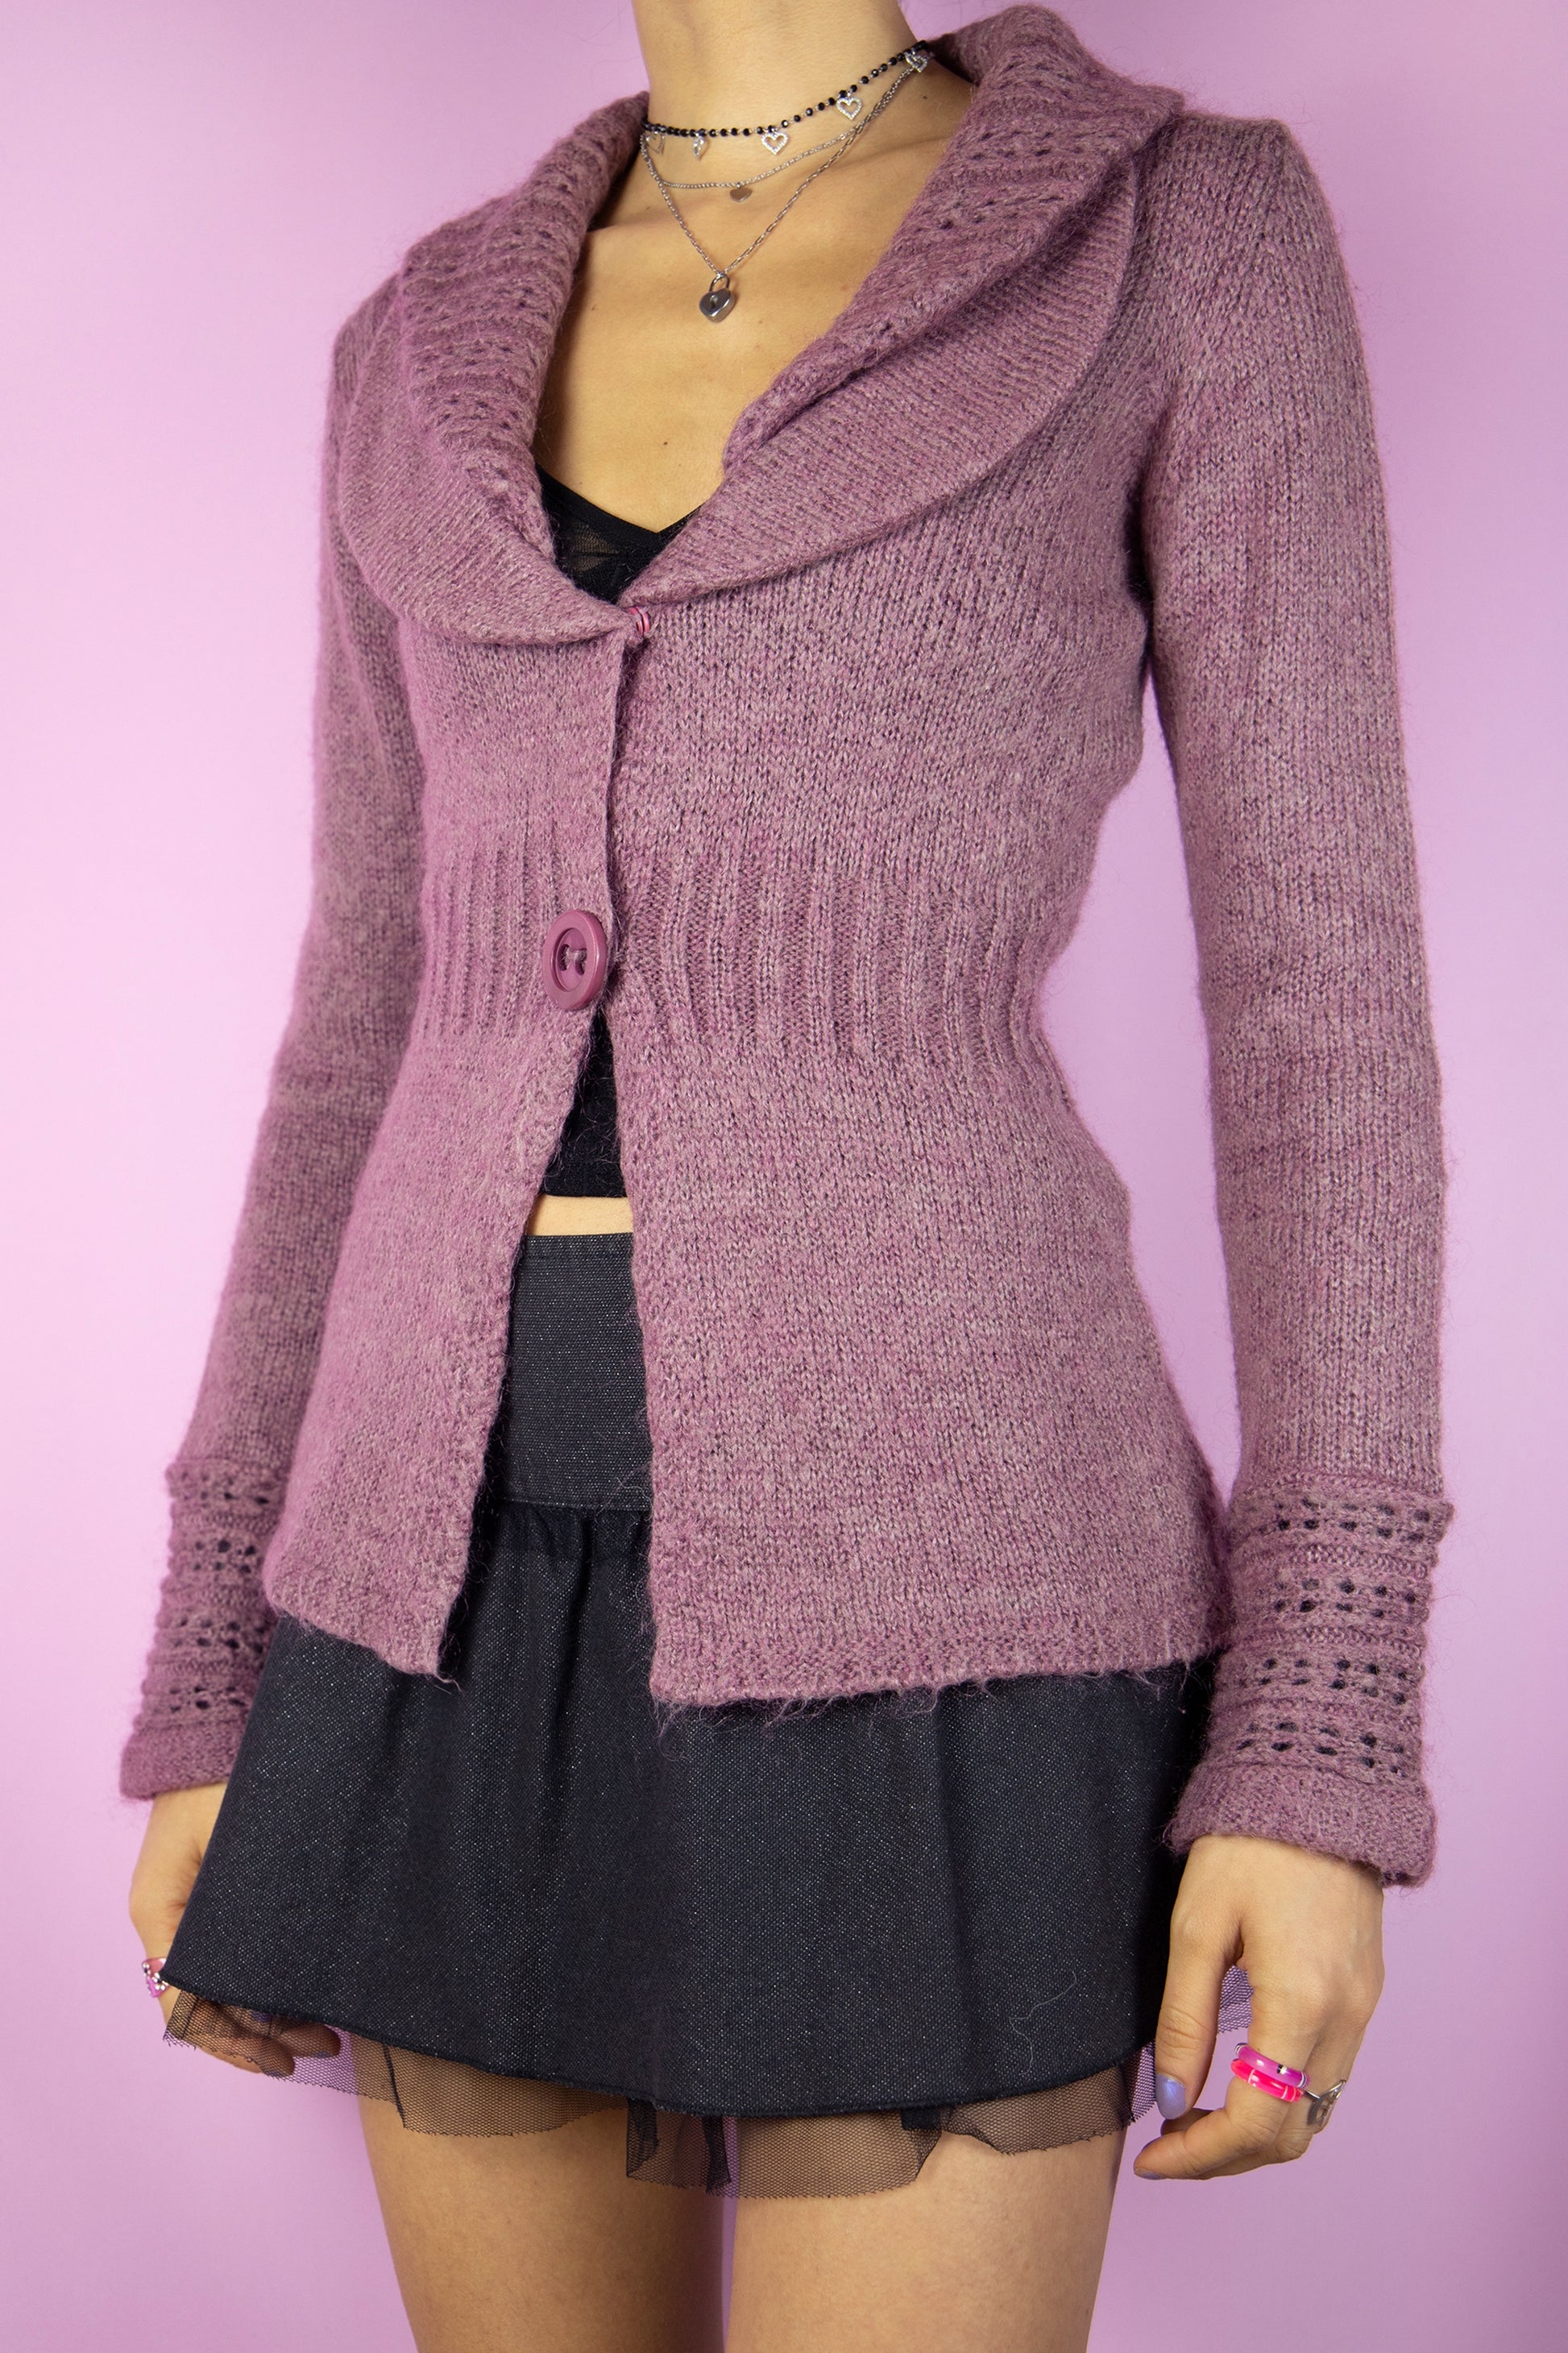 The Y2K Fairy Pink Knit Cardigan is a vintage mauve pink cardigan with a double collar and two-button closure. Boho romantic 2000s sweater.